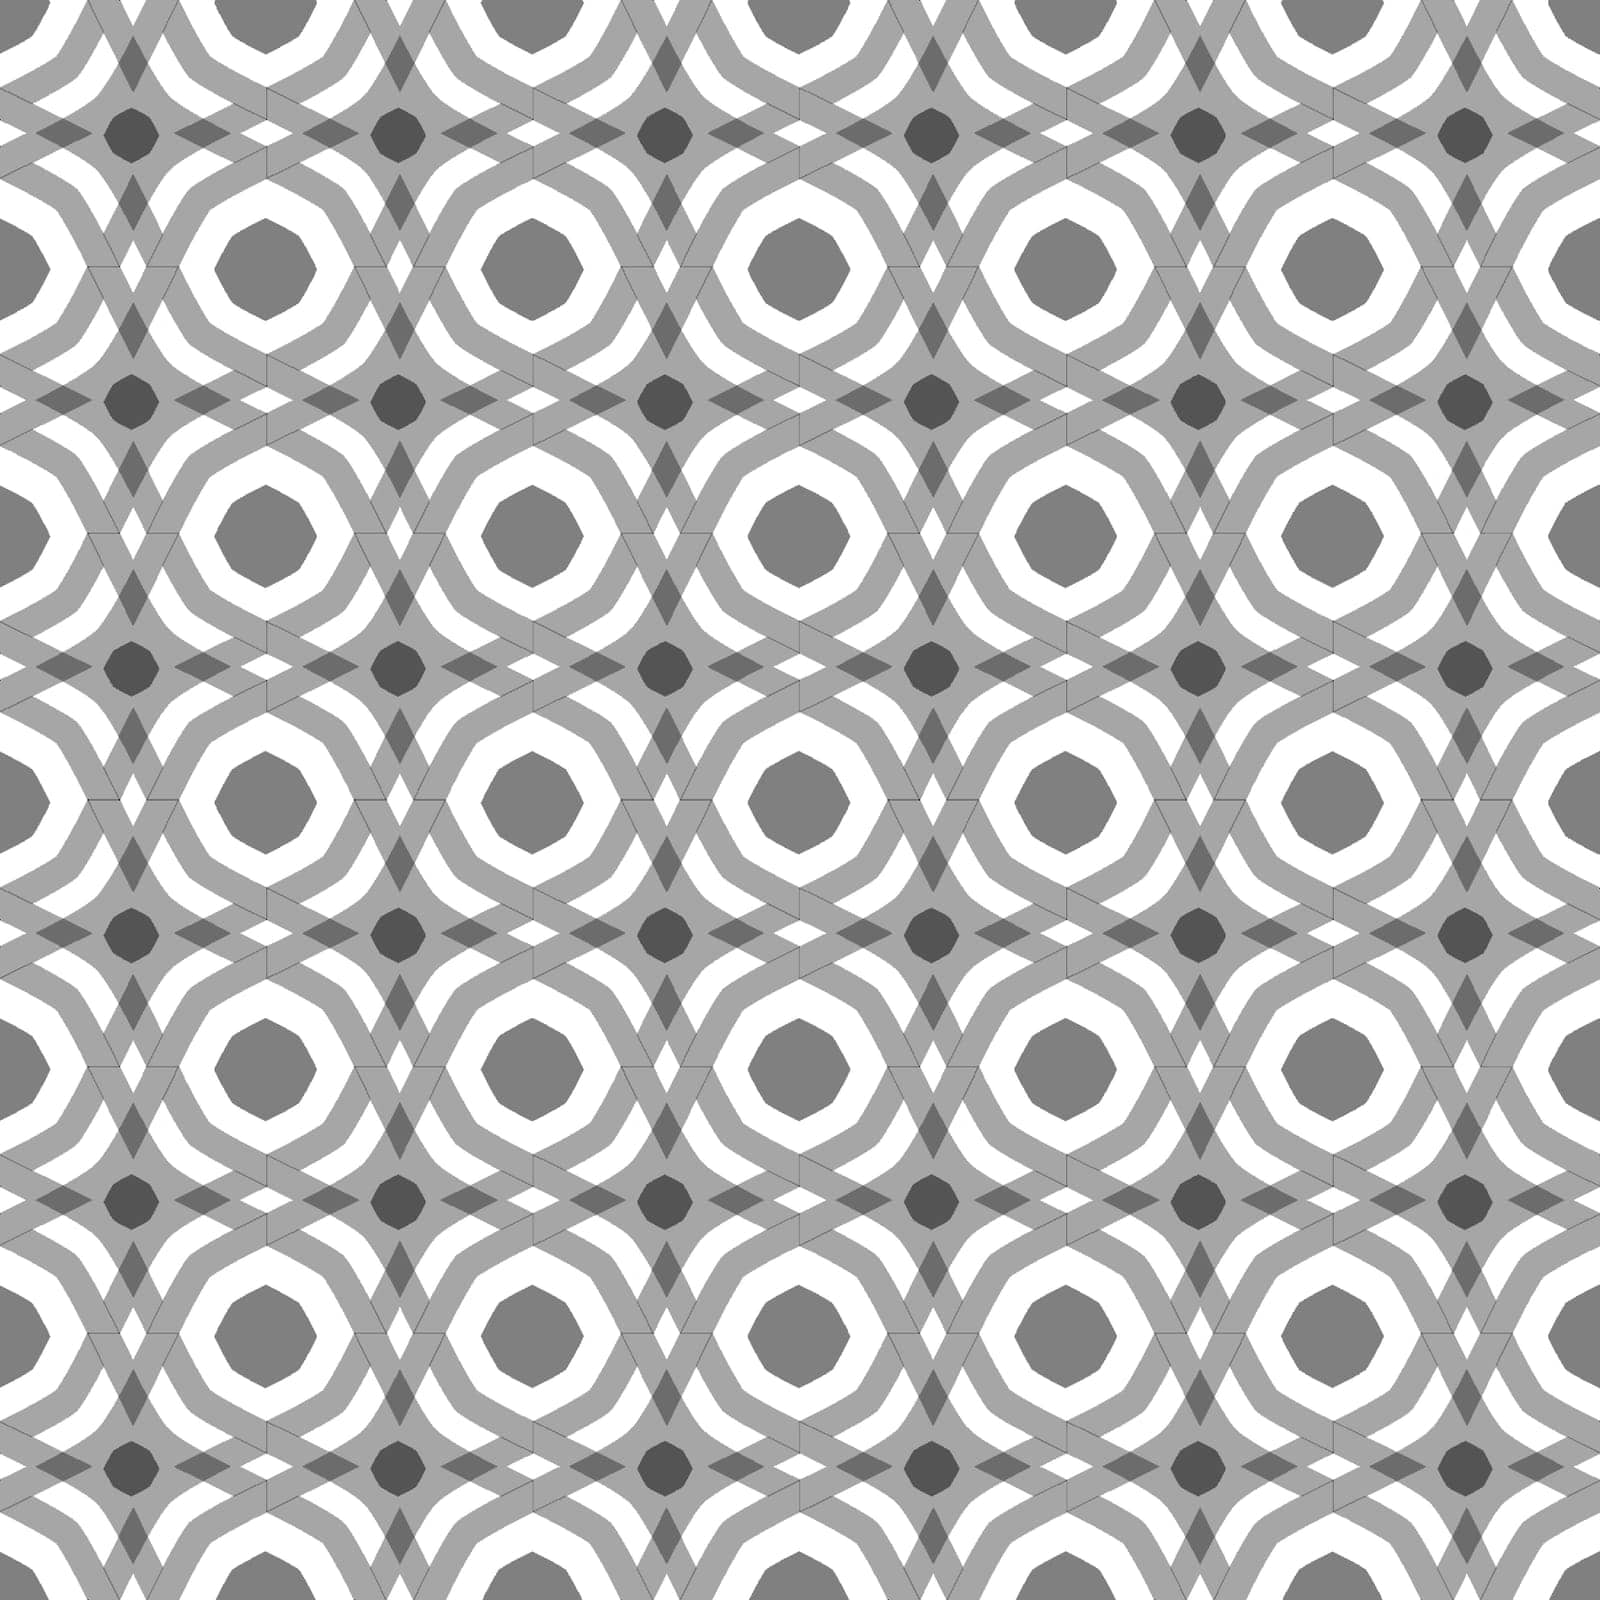 Abstract polyhedron seamless pattern. Transparency grey geometry circle elements on white background.